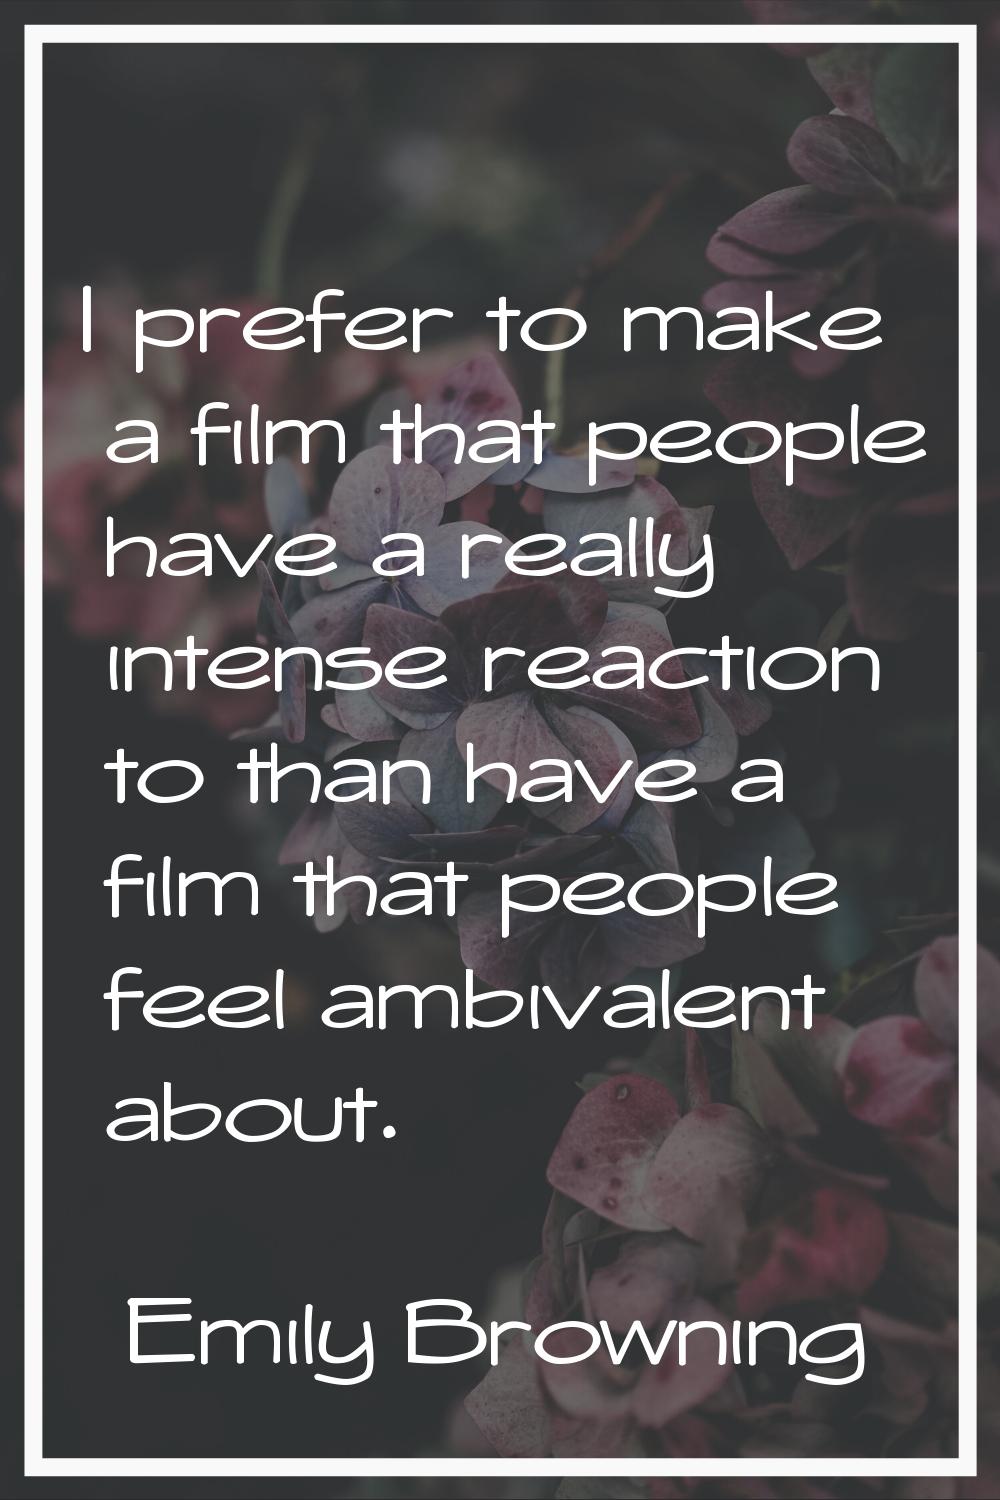 I prefer to make a film that people have a really intense reaction to than have a film that people 